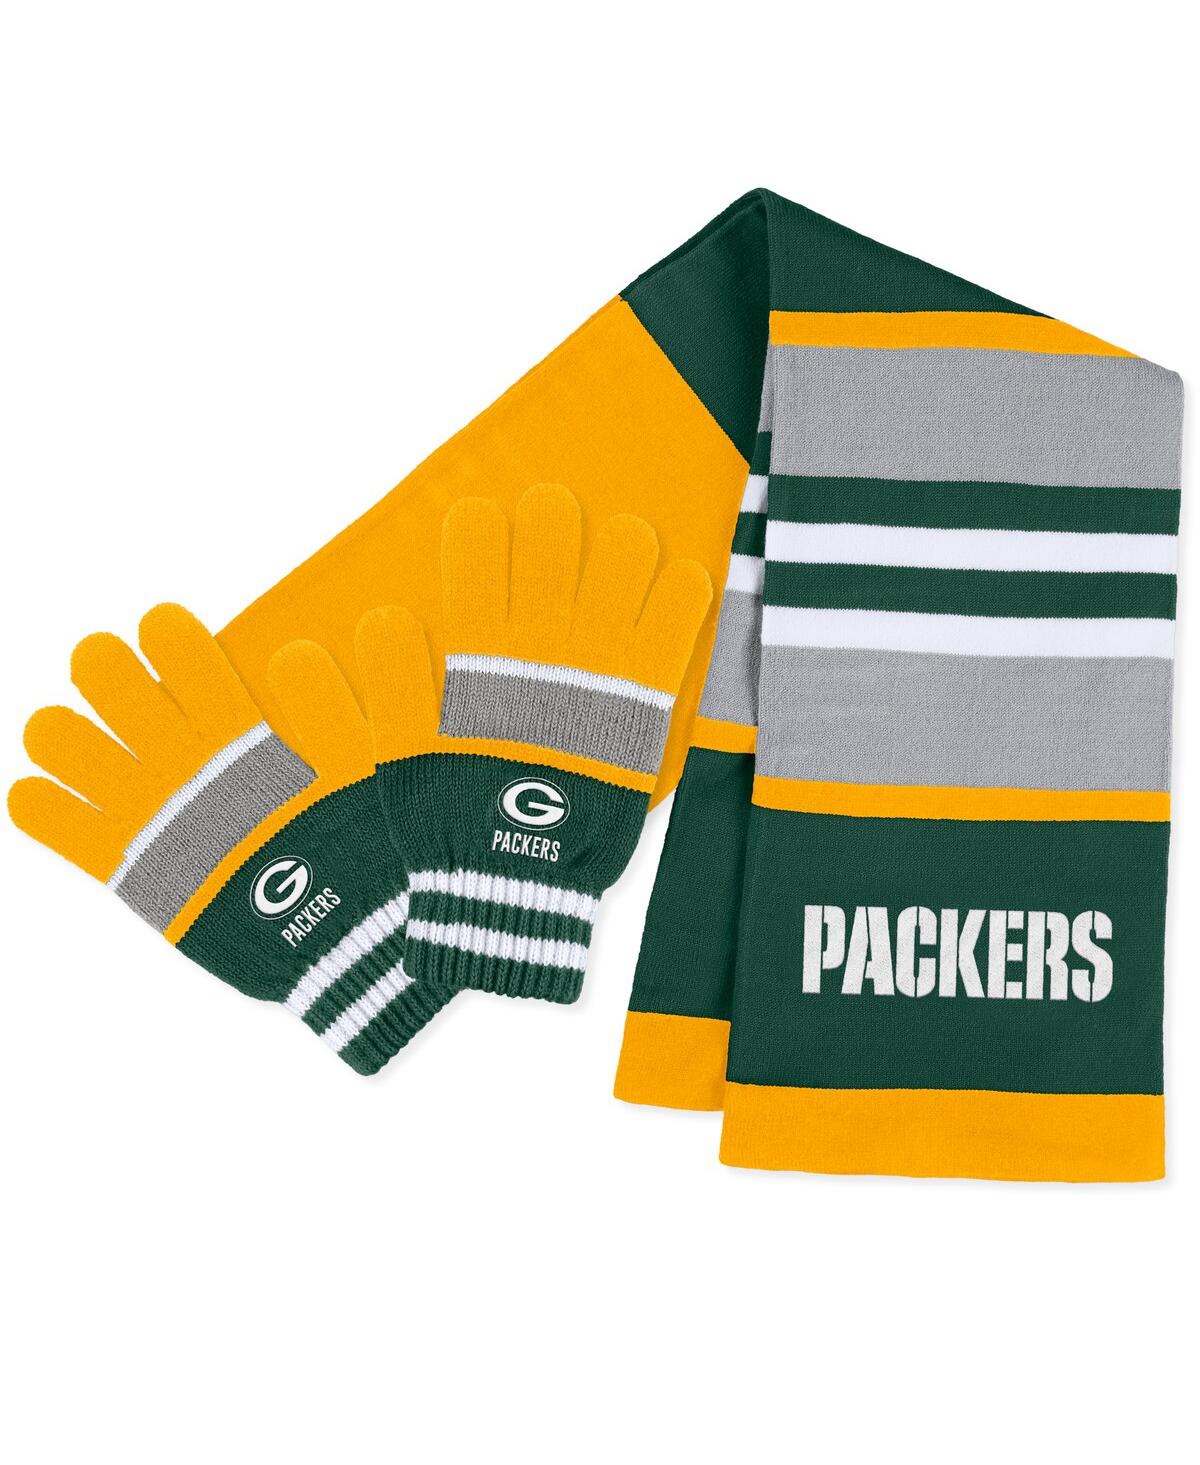 Women's Wear by Erin Andrews Green Bay Packers Stripe Glove and Scarf Set - Yellow, Green